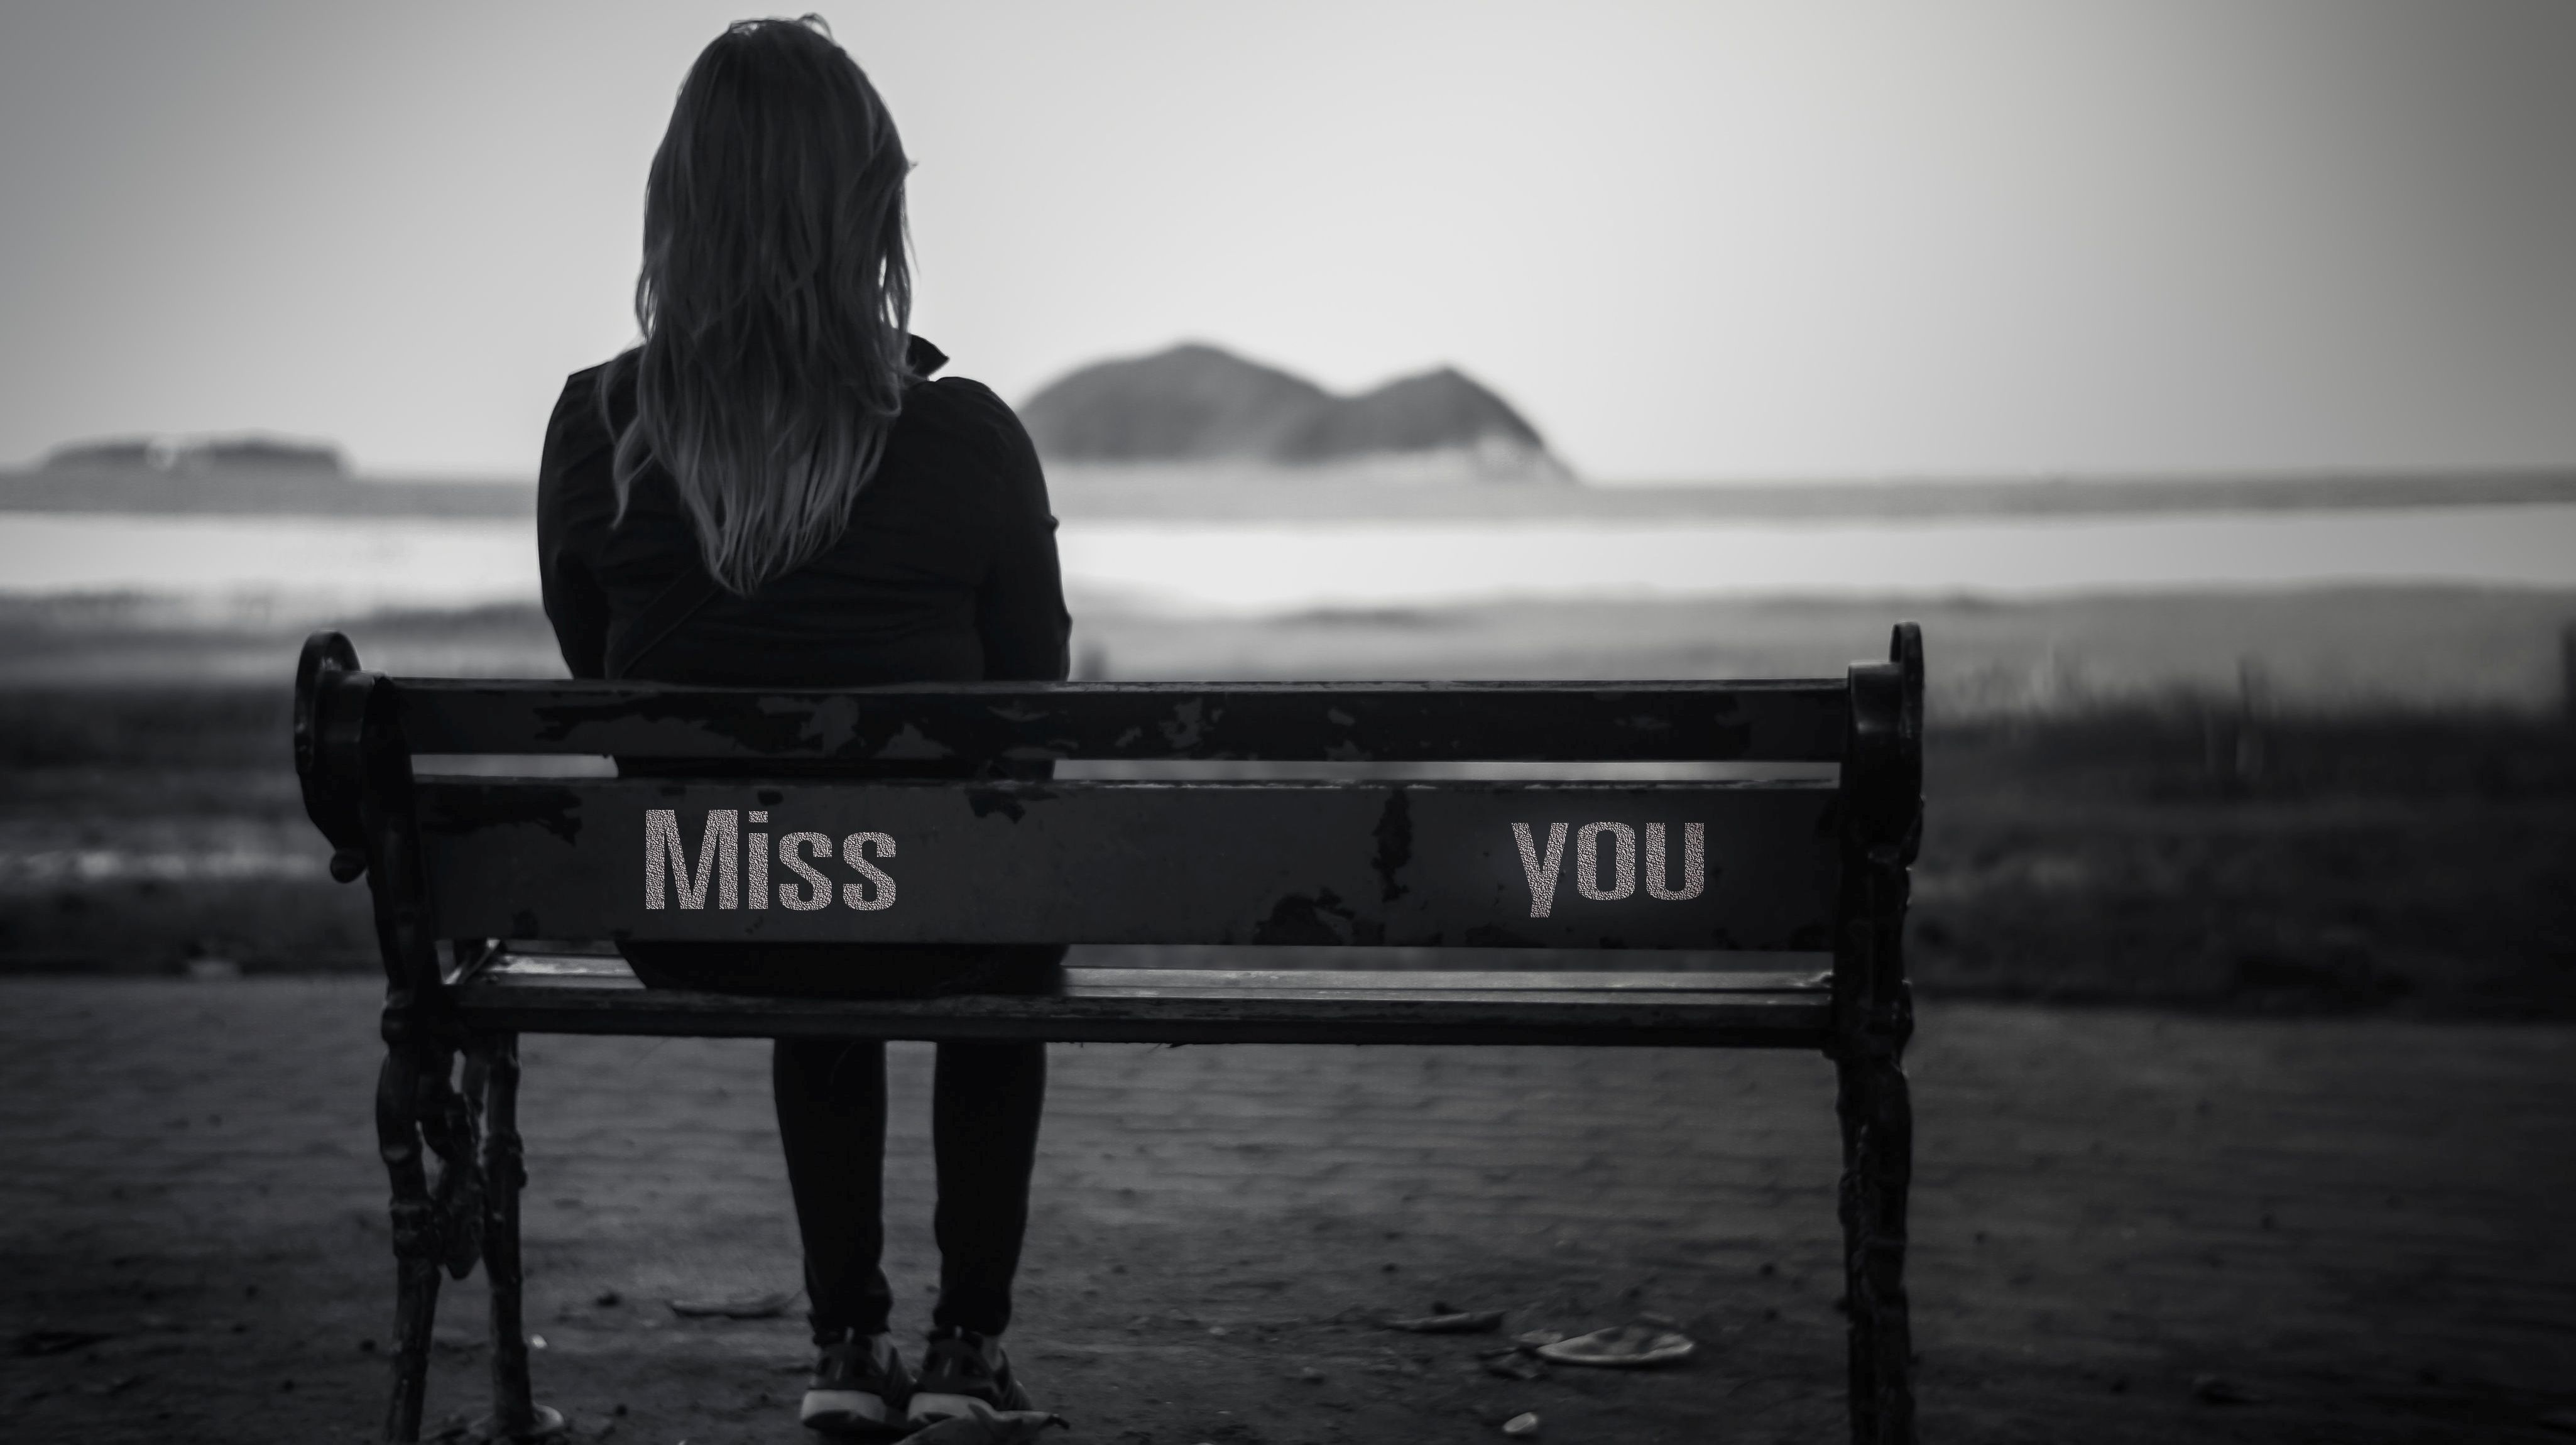 Mood Evening Miss You Bench Sadness Girl Greycale Alone Wallpaper